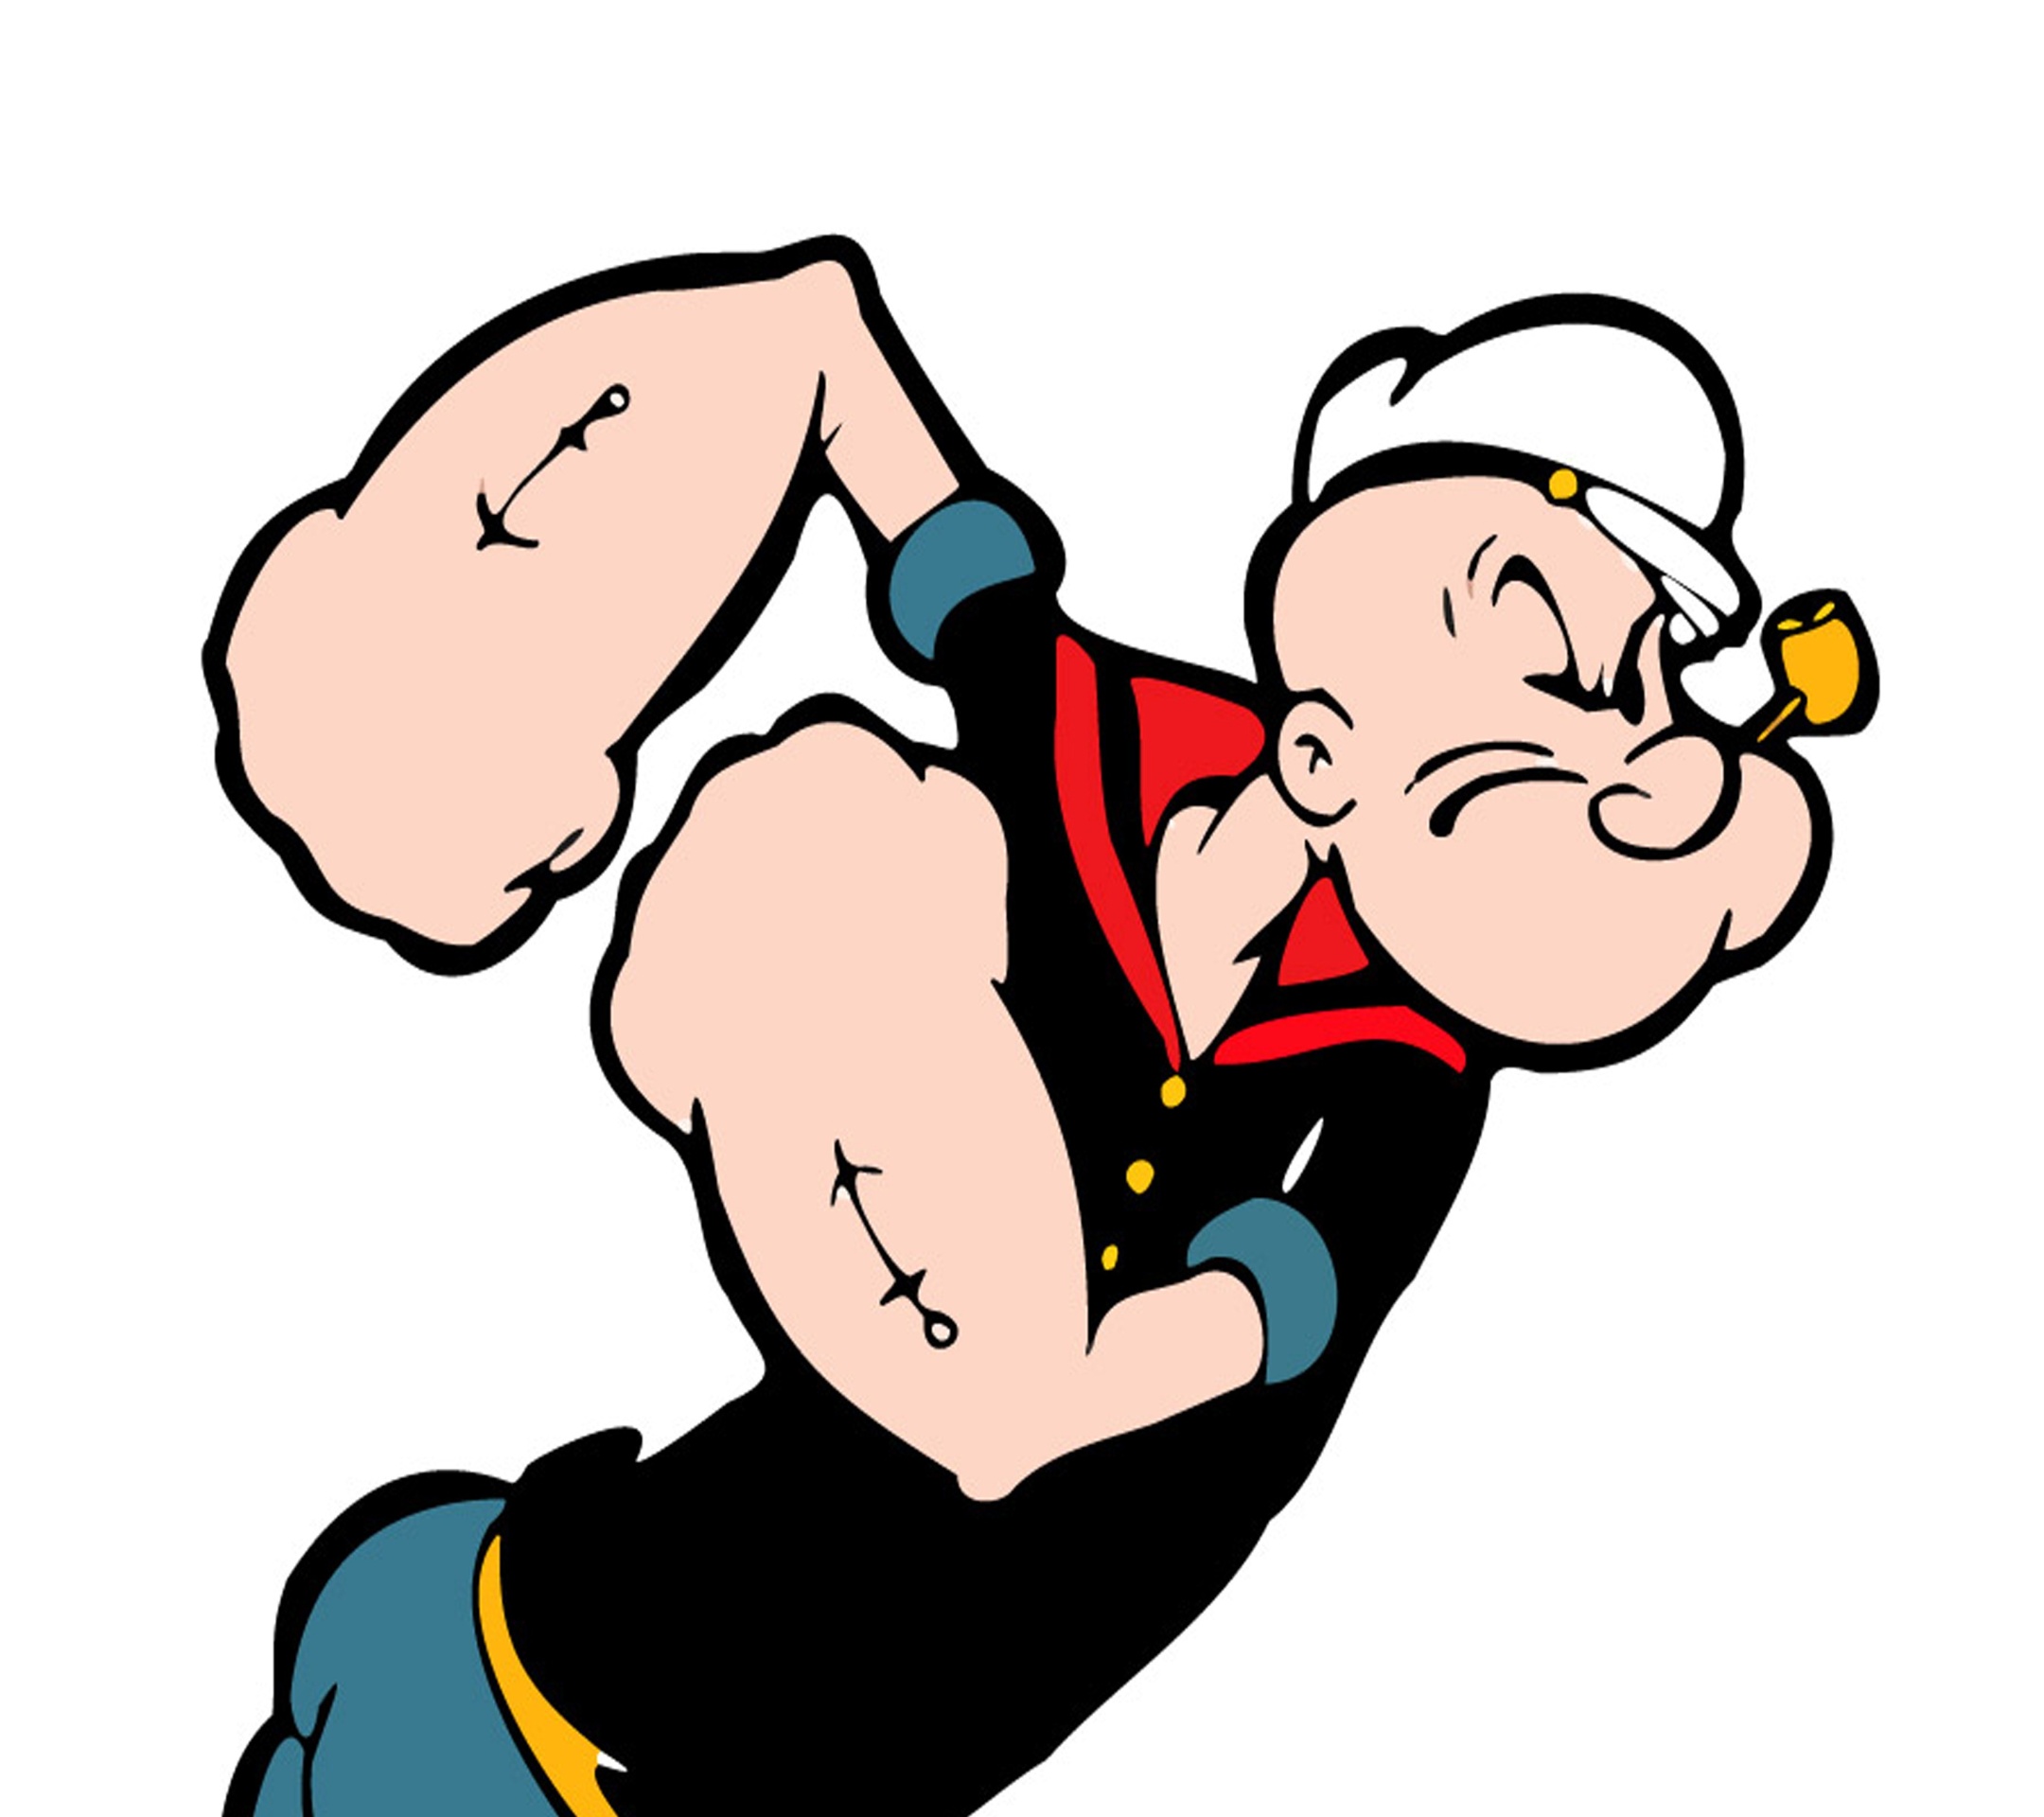 [27+] Popeye The Sailor Man Wallpapers